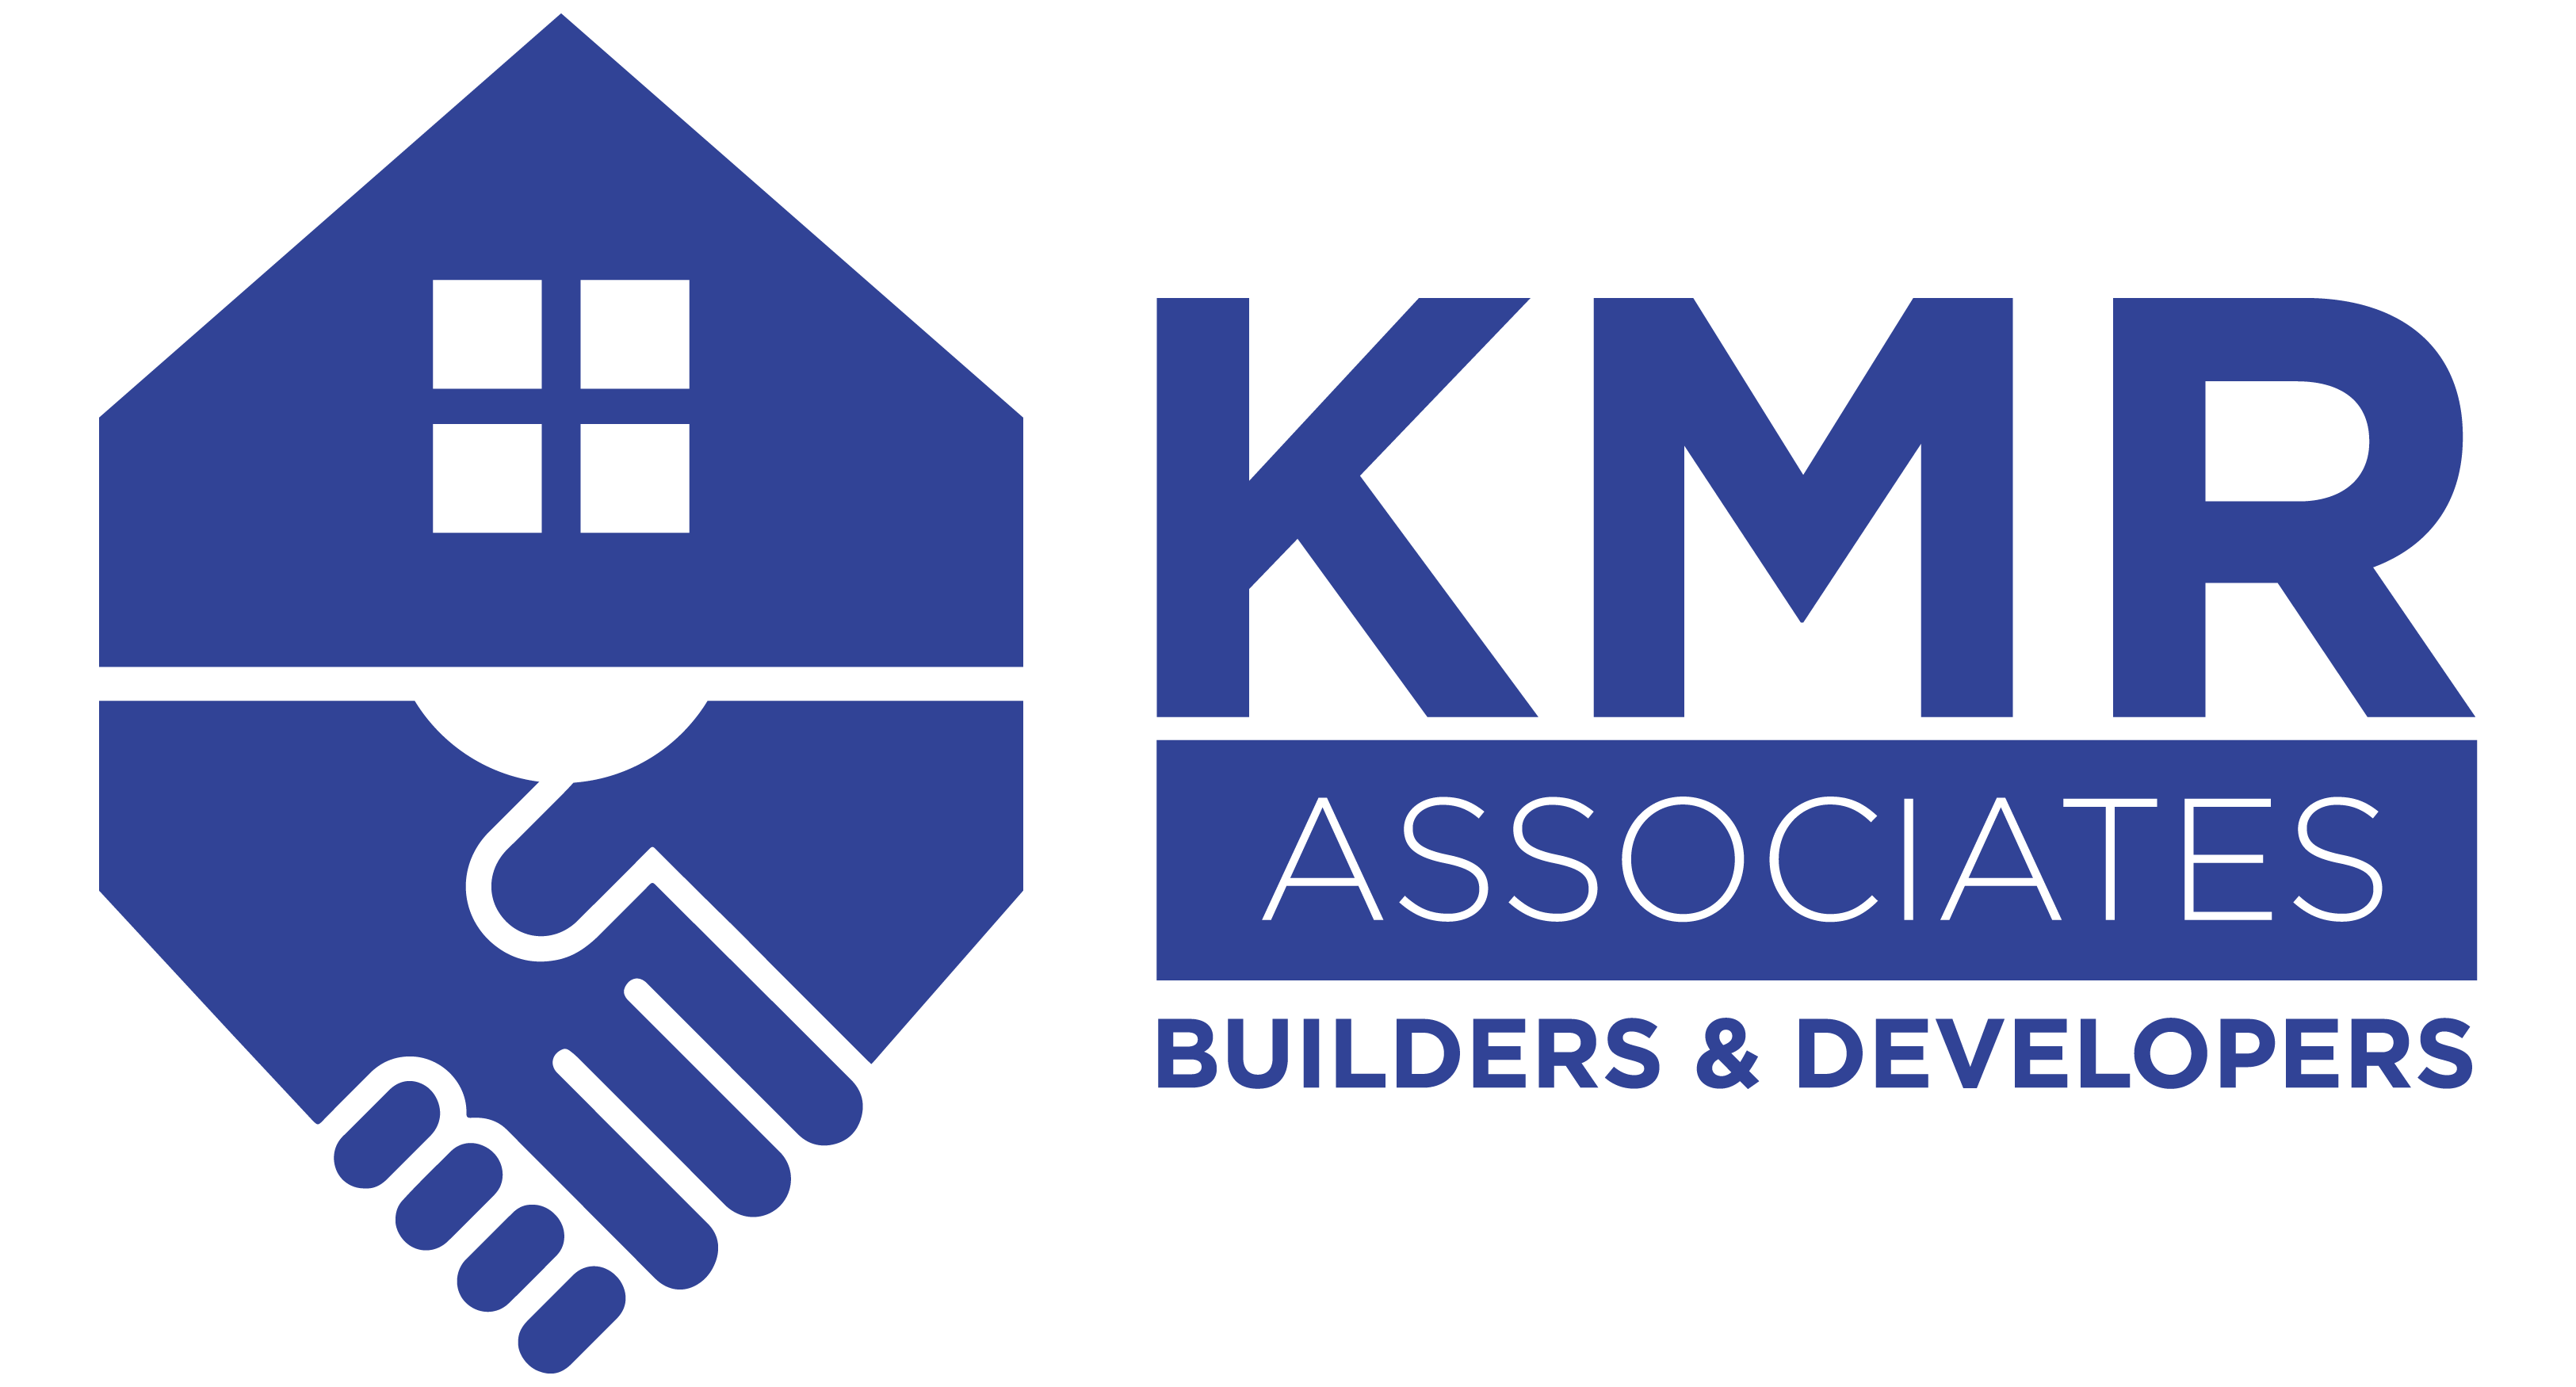 KMR Associates Builders and Developers